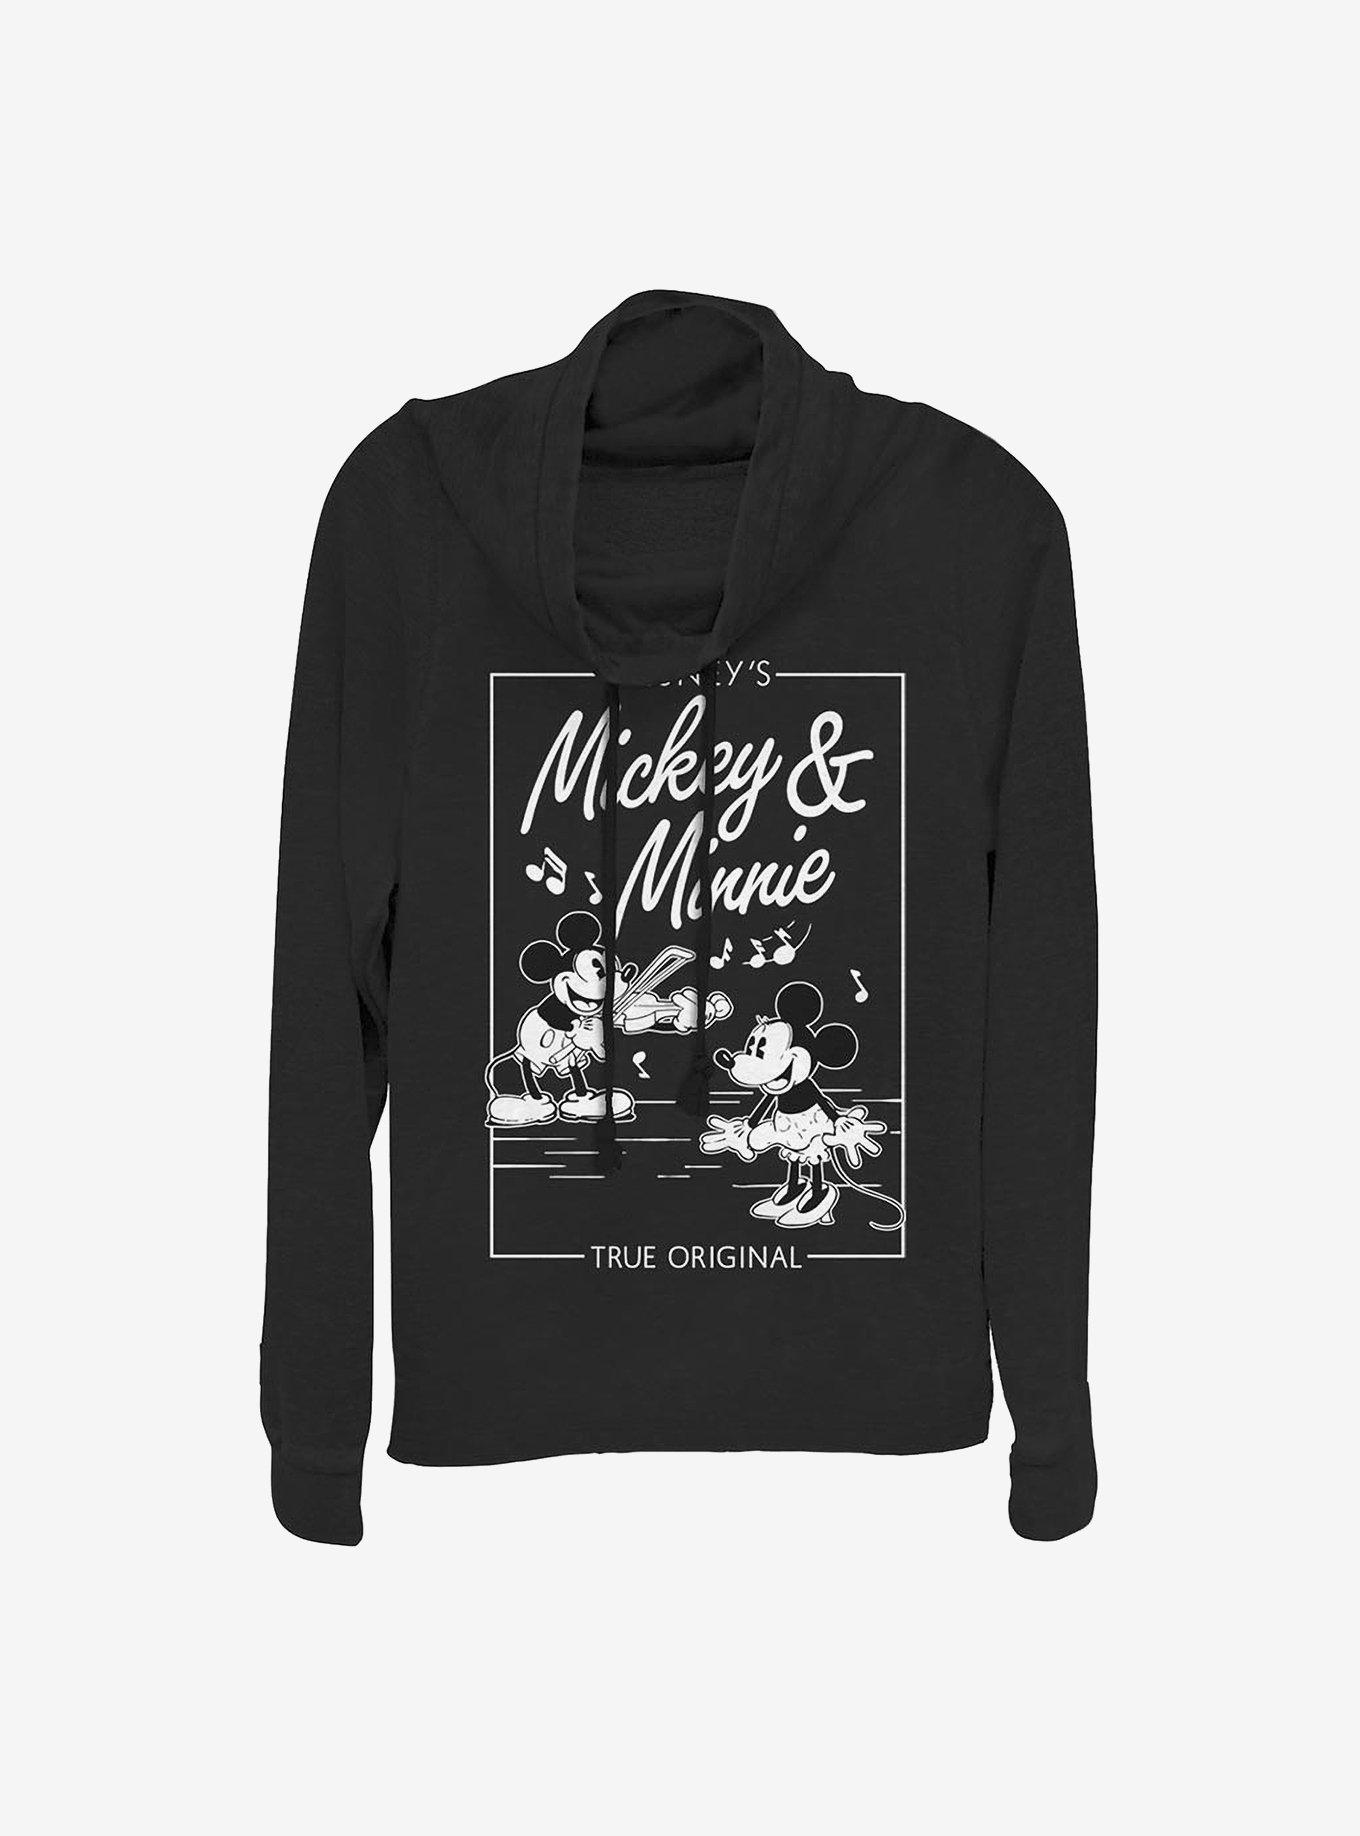 Disney Mickey Mouse & Minnie Mouse Music Cover Cowlneck Long-Sleeve Girls Top, BLACK, hi-res